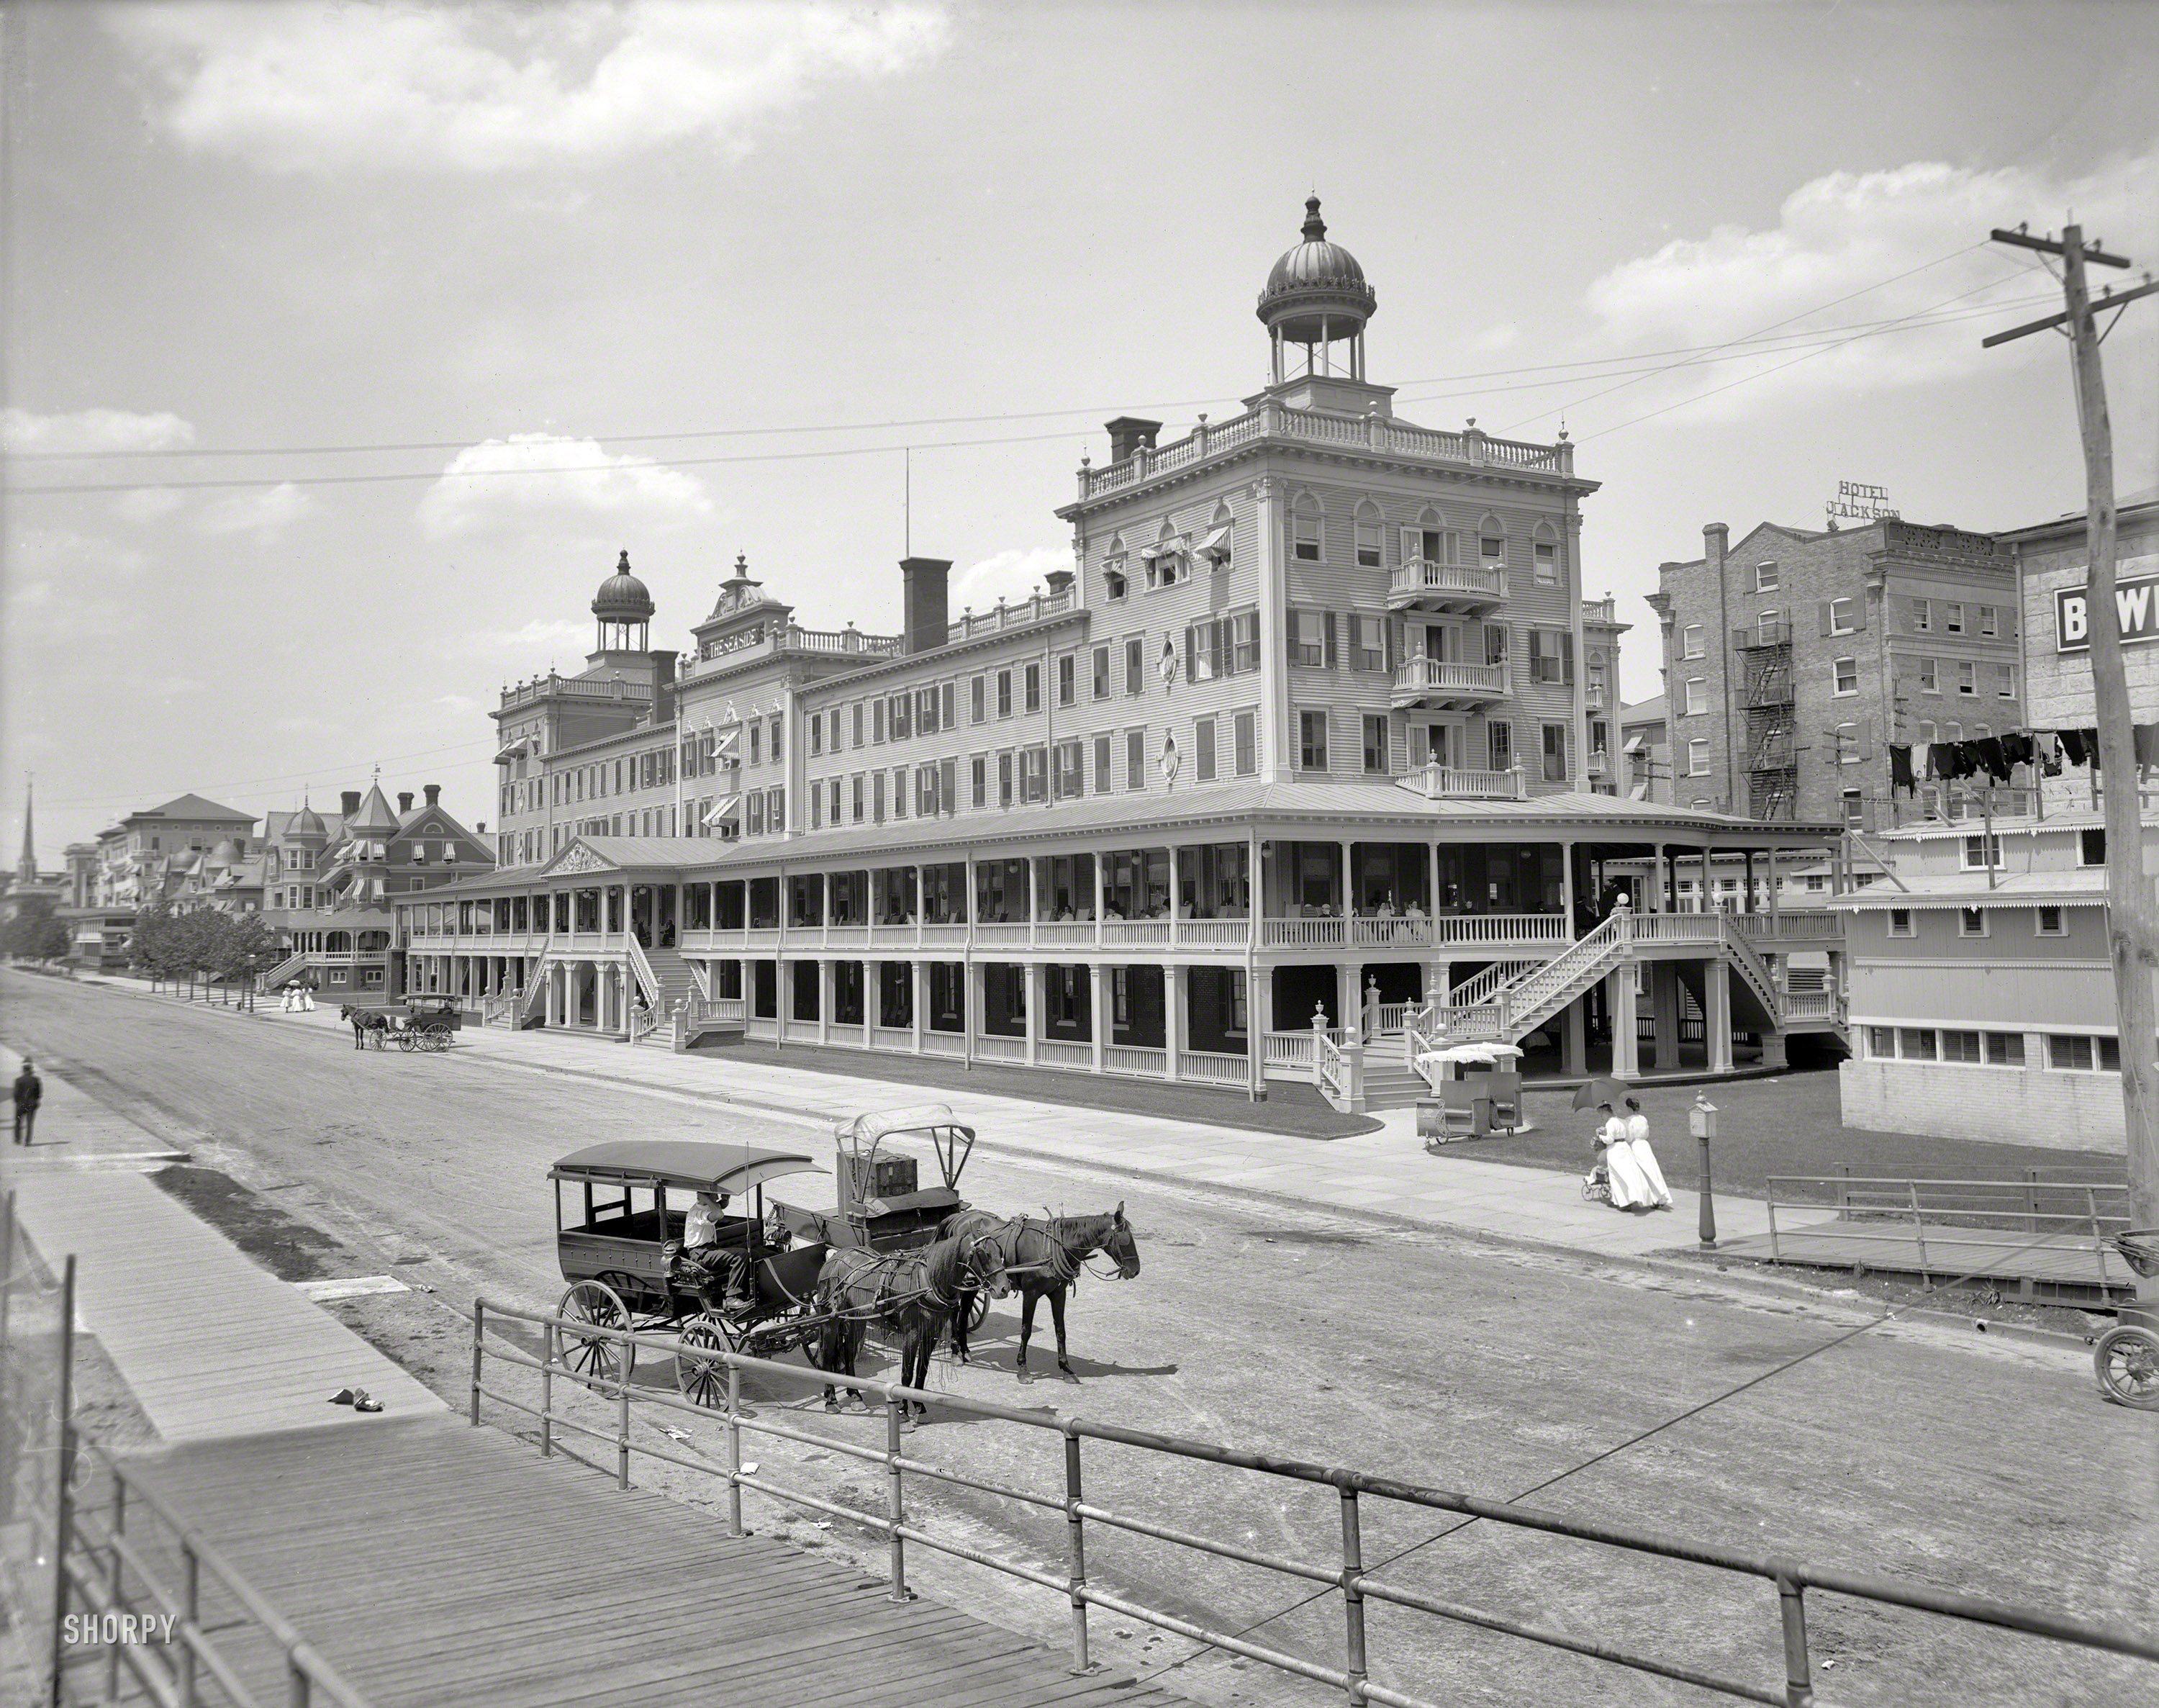 Atlantic City circa 1907. "Seaside Hotel (Seaside House)." Note the fly netting on the horse. 8x10 inch glass negative, Detroit Publishing Co. View full size.